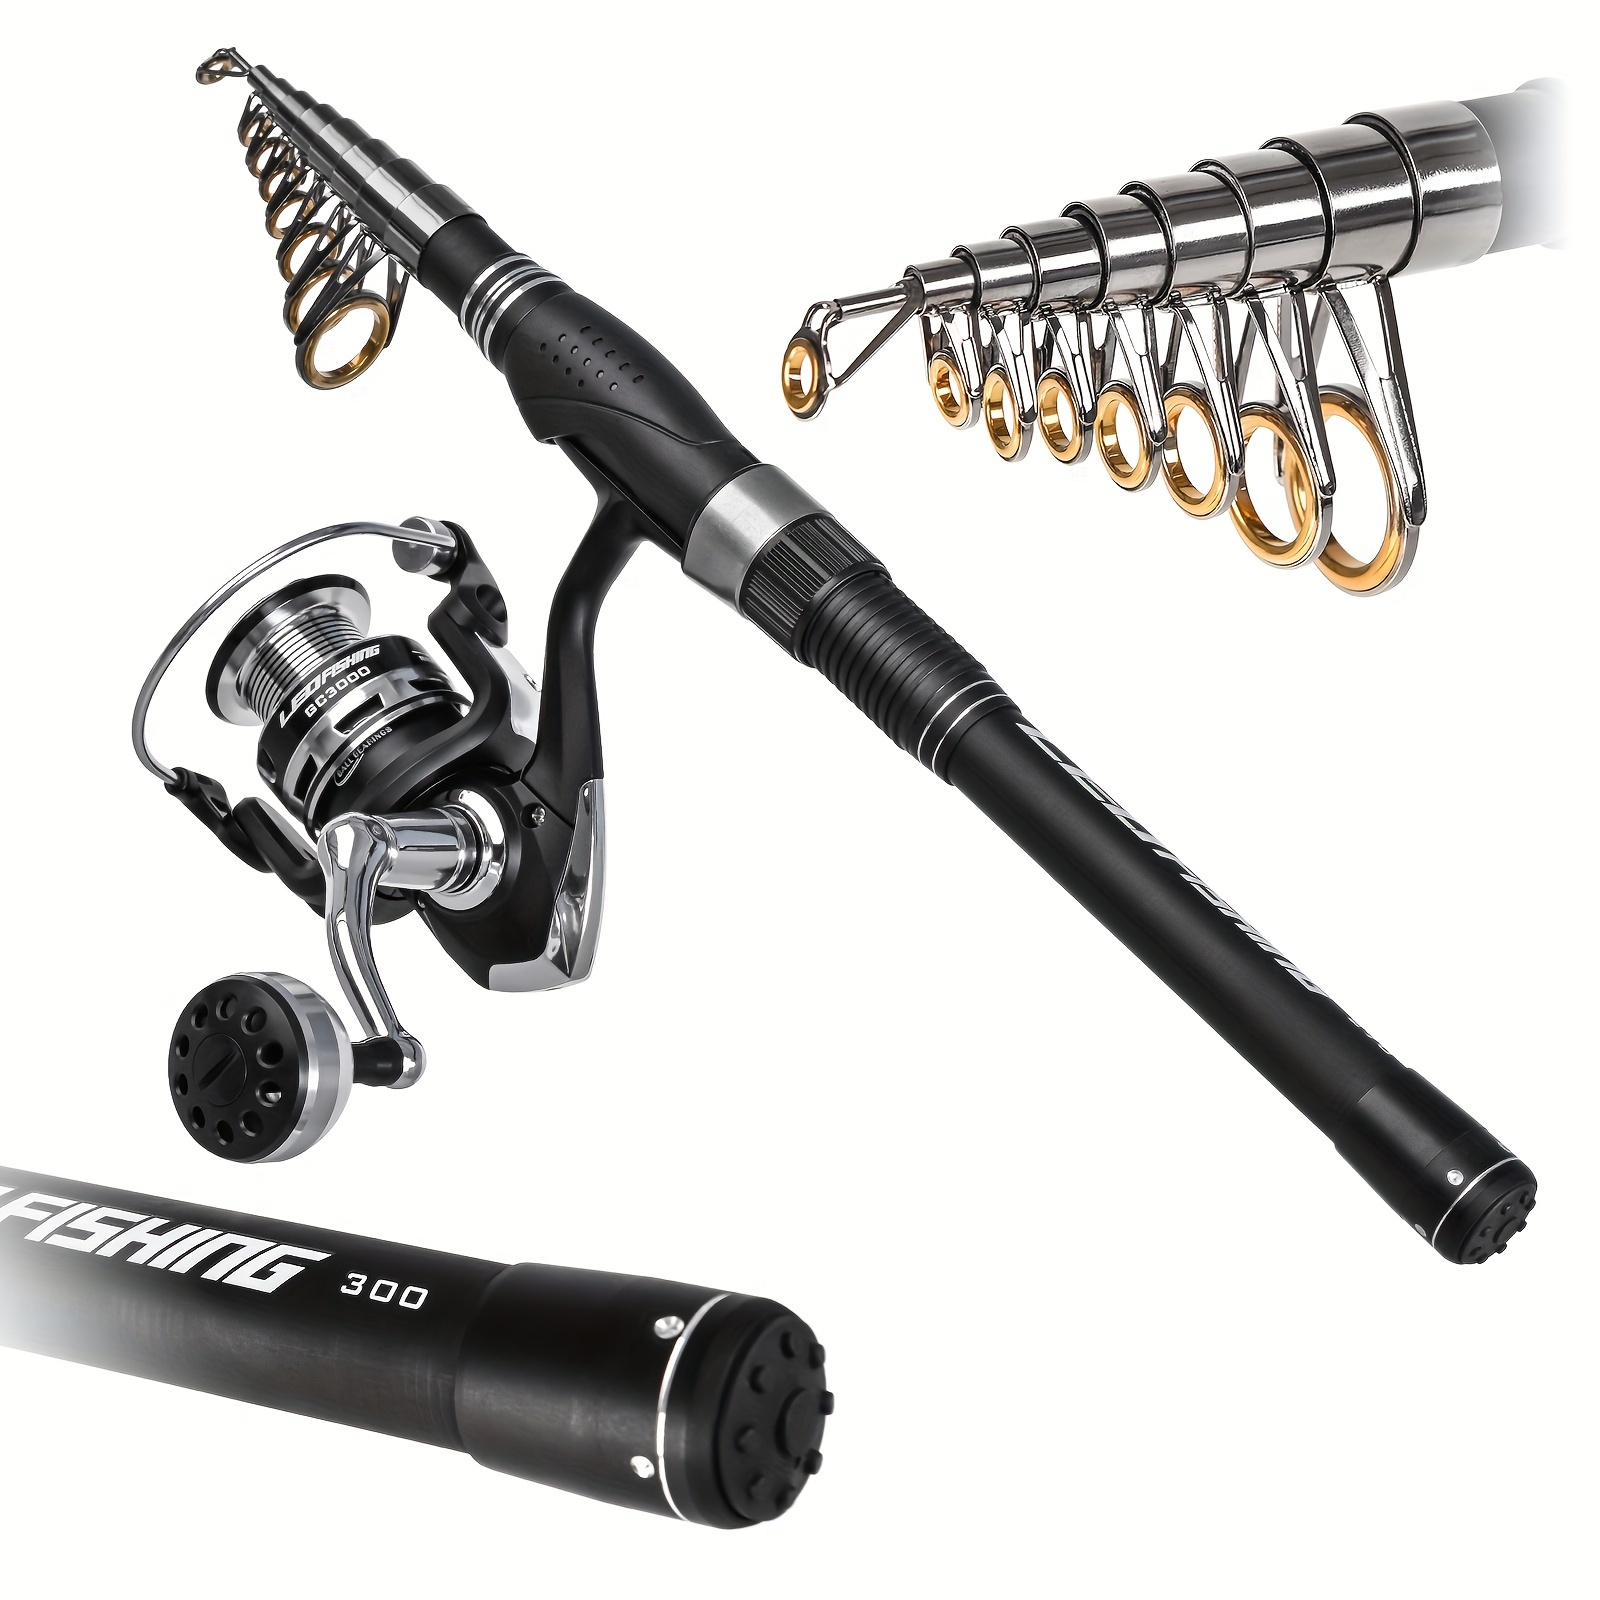 🎣 LuxeCarbFRP Telescopic Fishing Rod - Innovation for Fishing